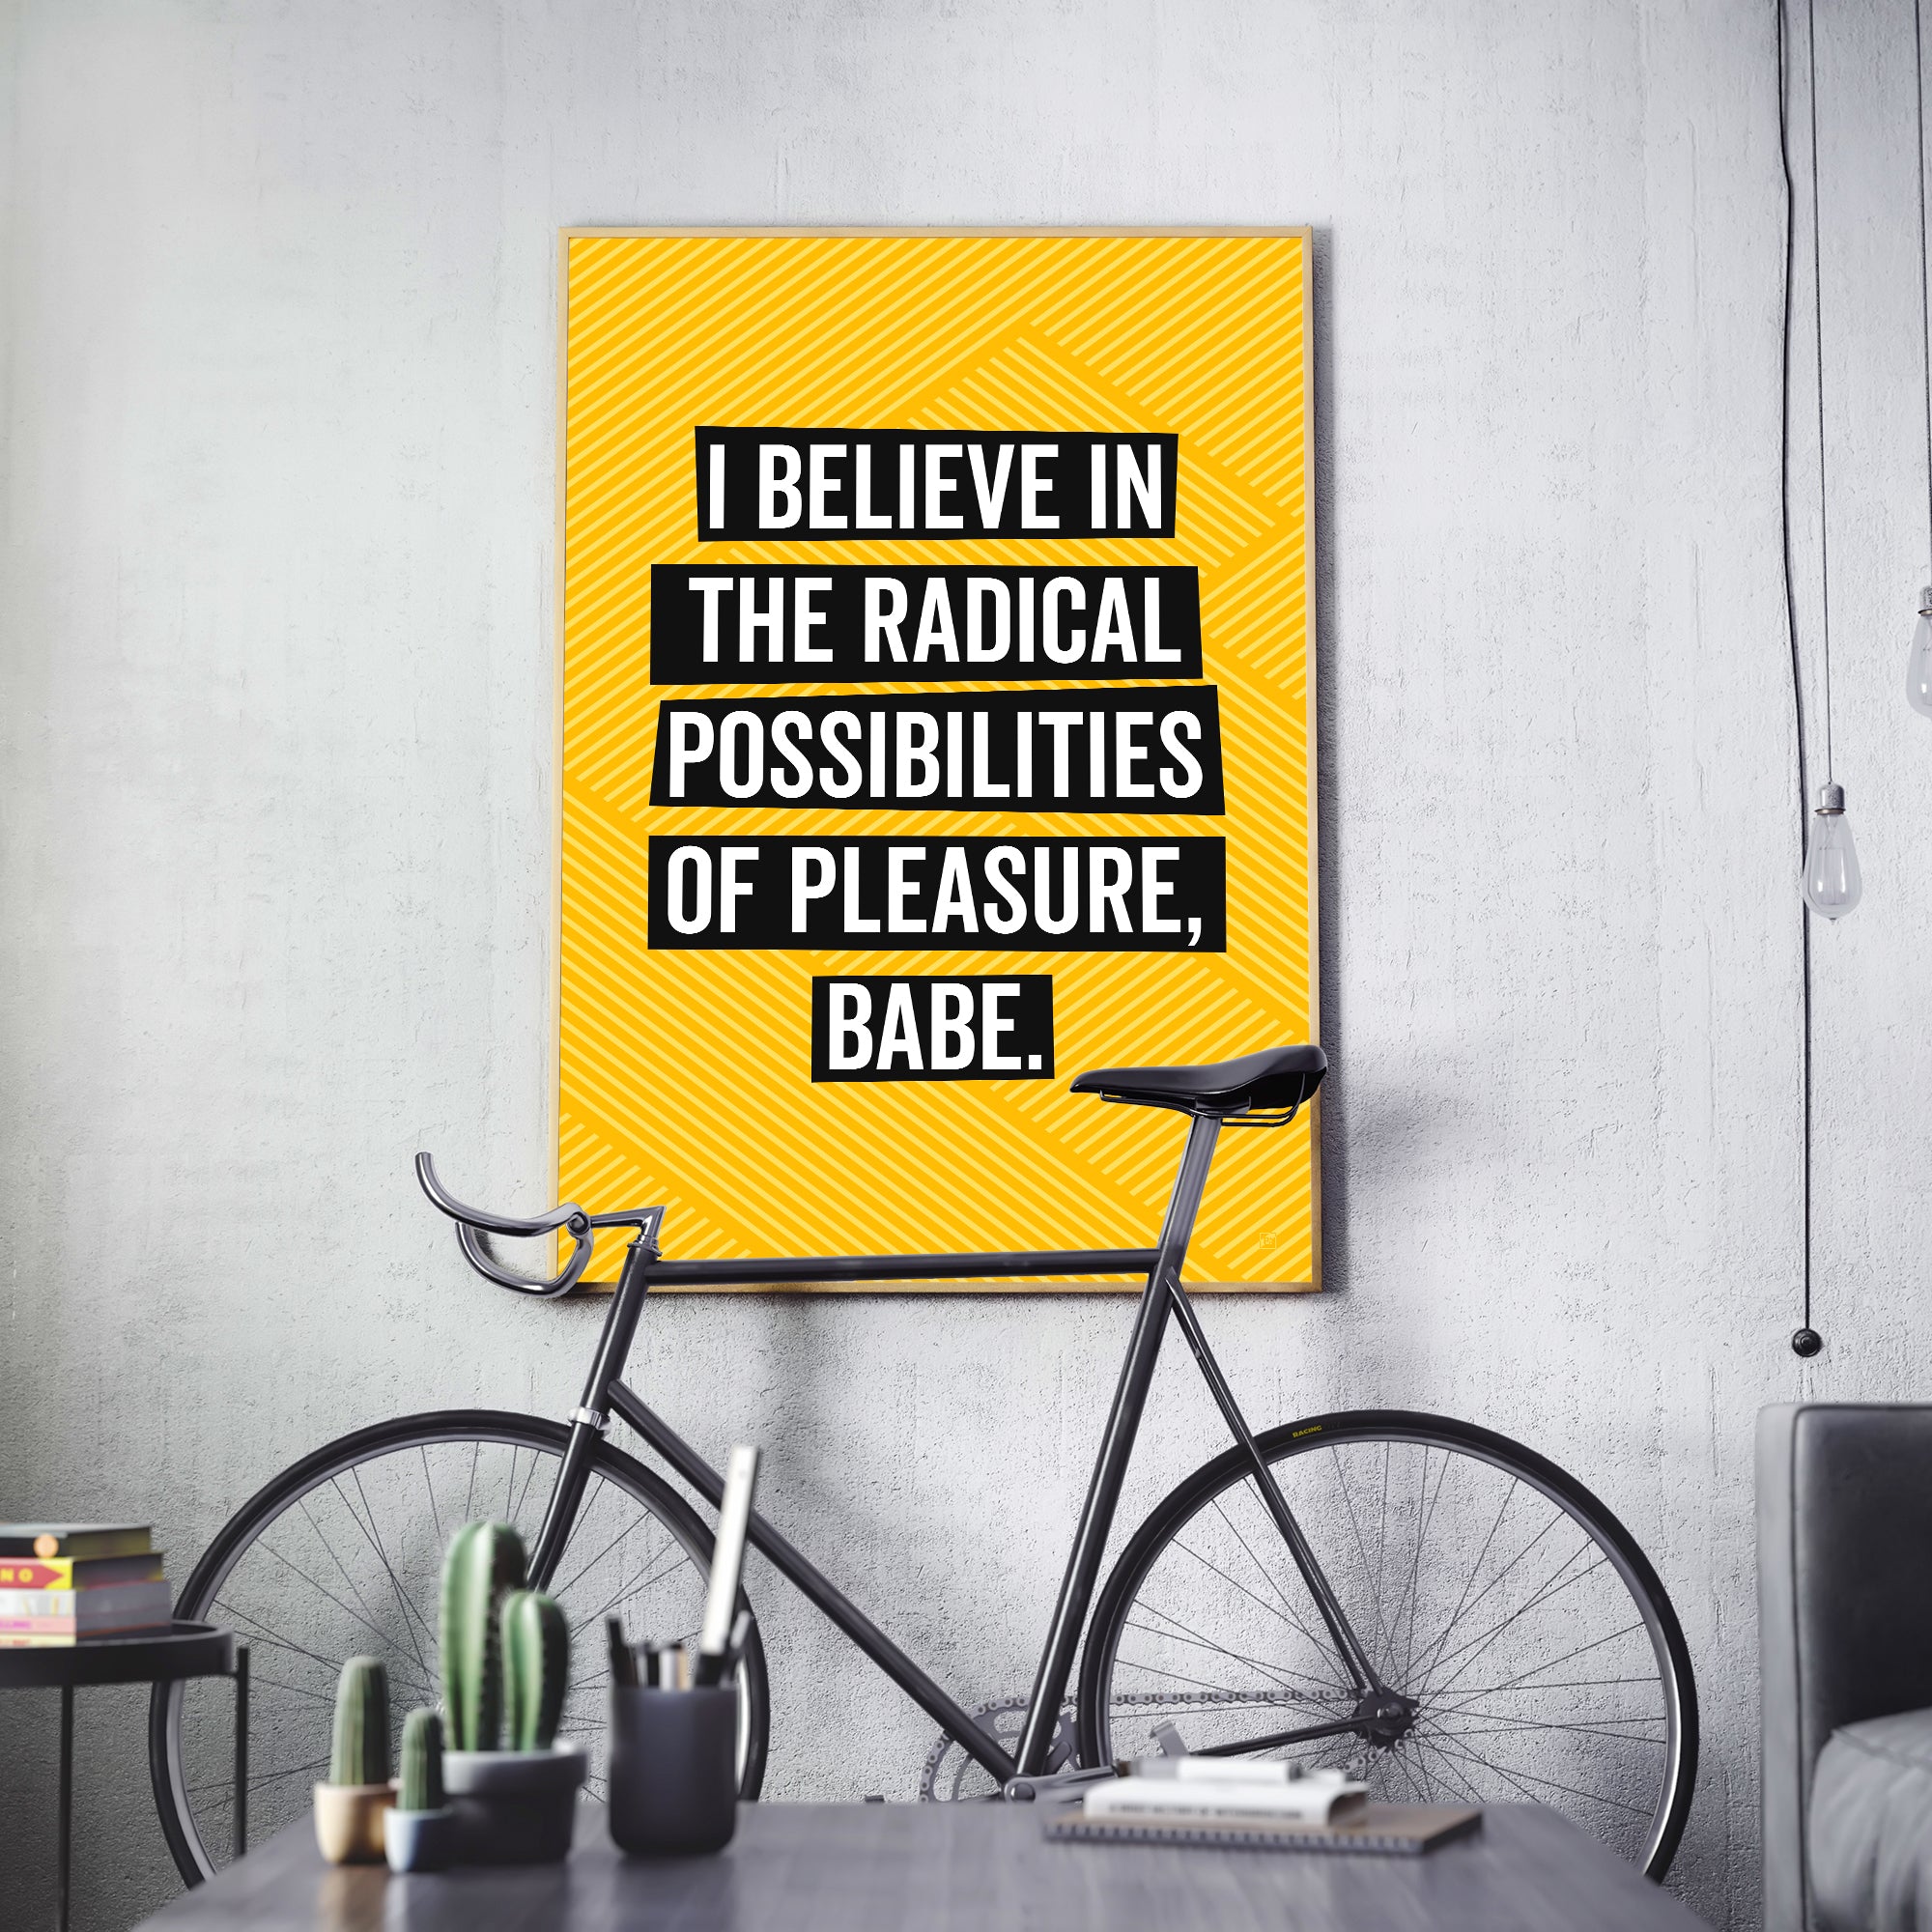 Be inspired by our golden yellow Bikini Kill "I Believe in the Radical Possibilities of Pleasure Babe" lyrics art print! This artwork has been printed using the giclée process on archival acid-free paper and is showcased in a modern living room, capturing its timeless beauty in every detail.